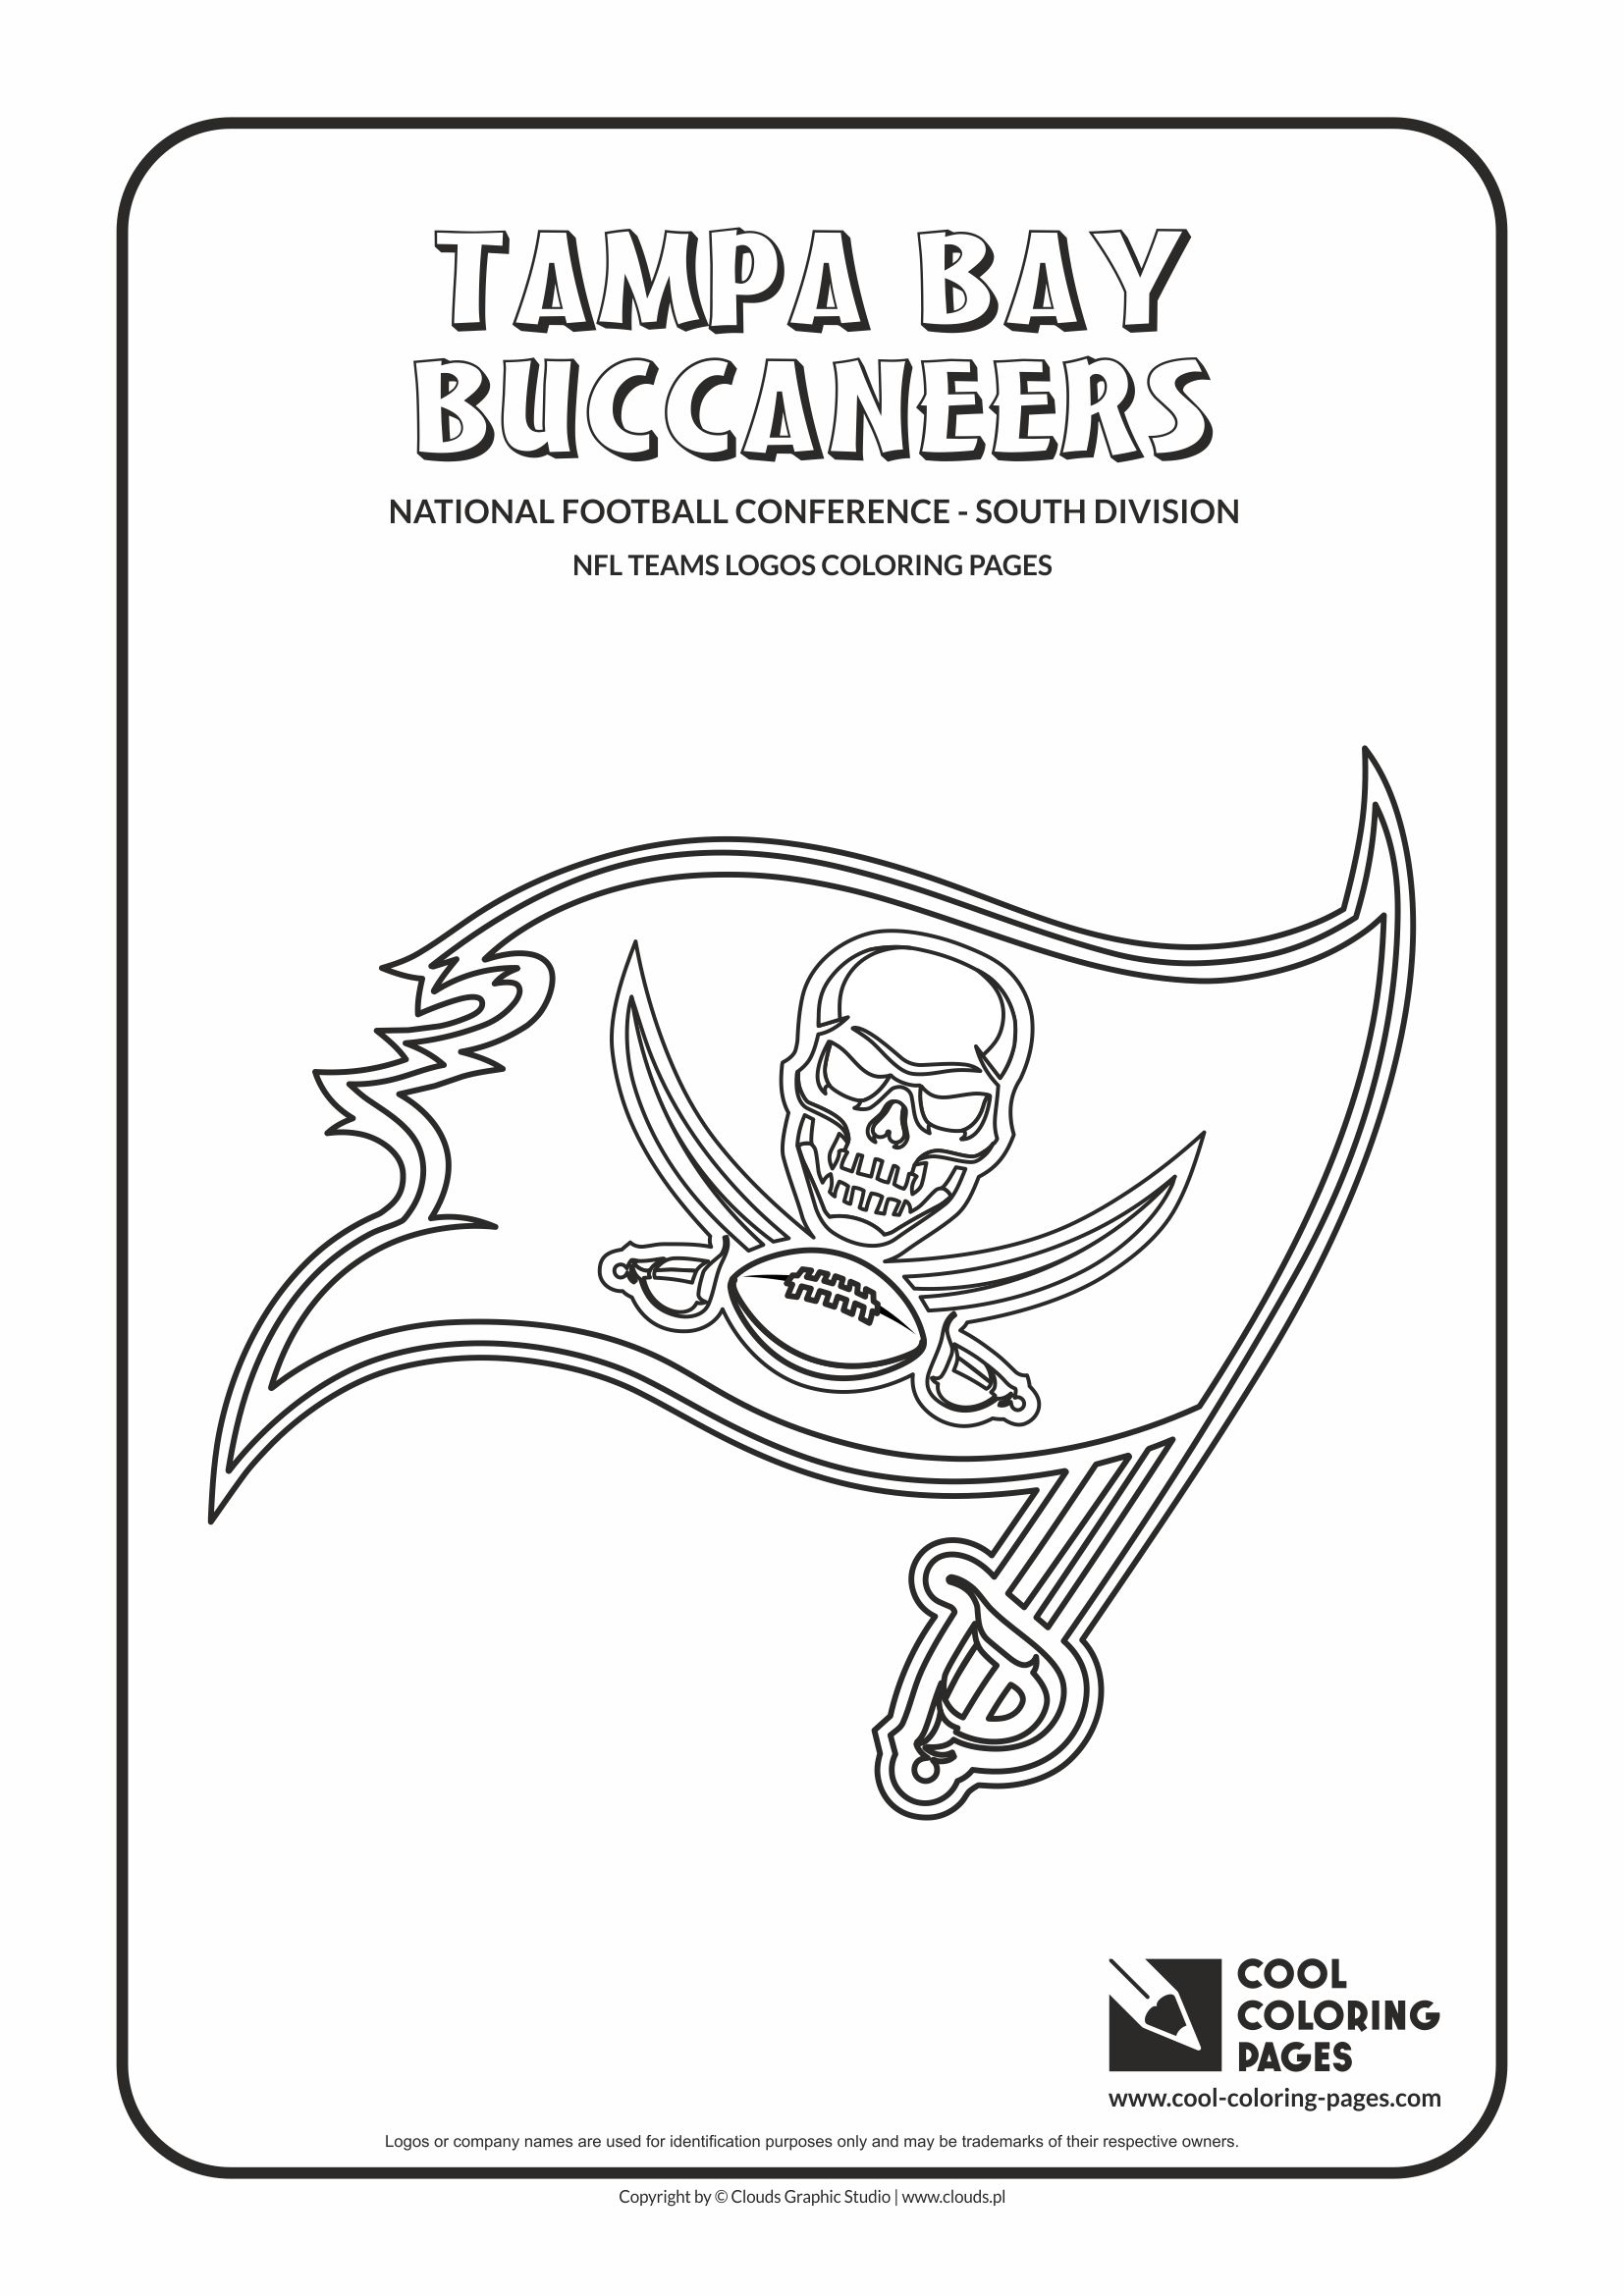 Download Cool Coloring Pages Tampa Bay Buccaneers - NFL American ...